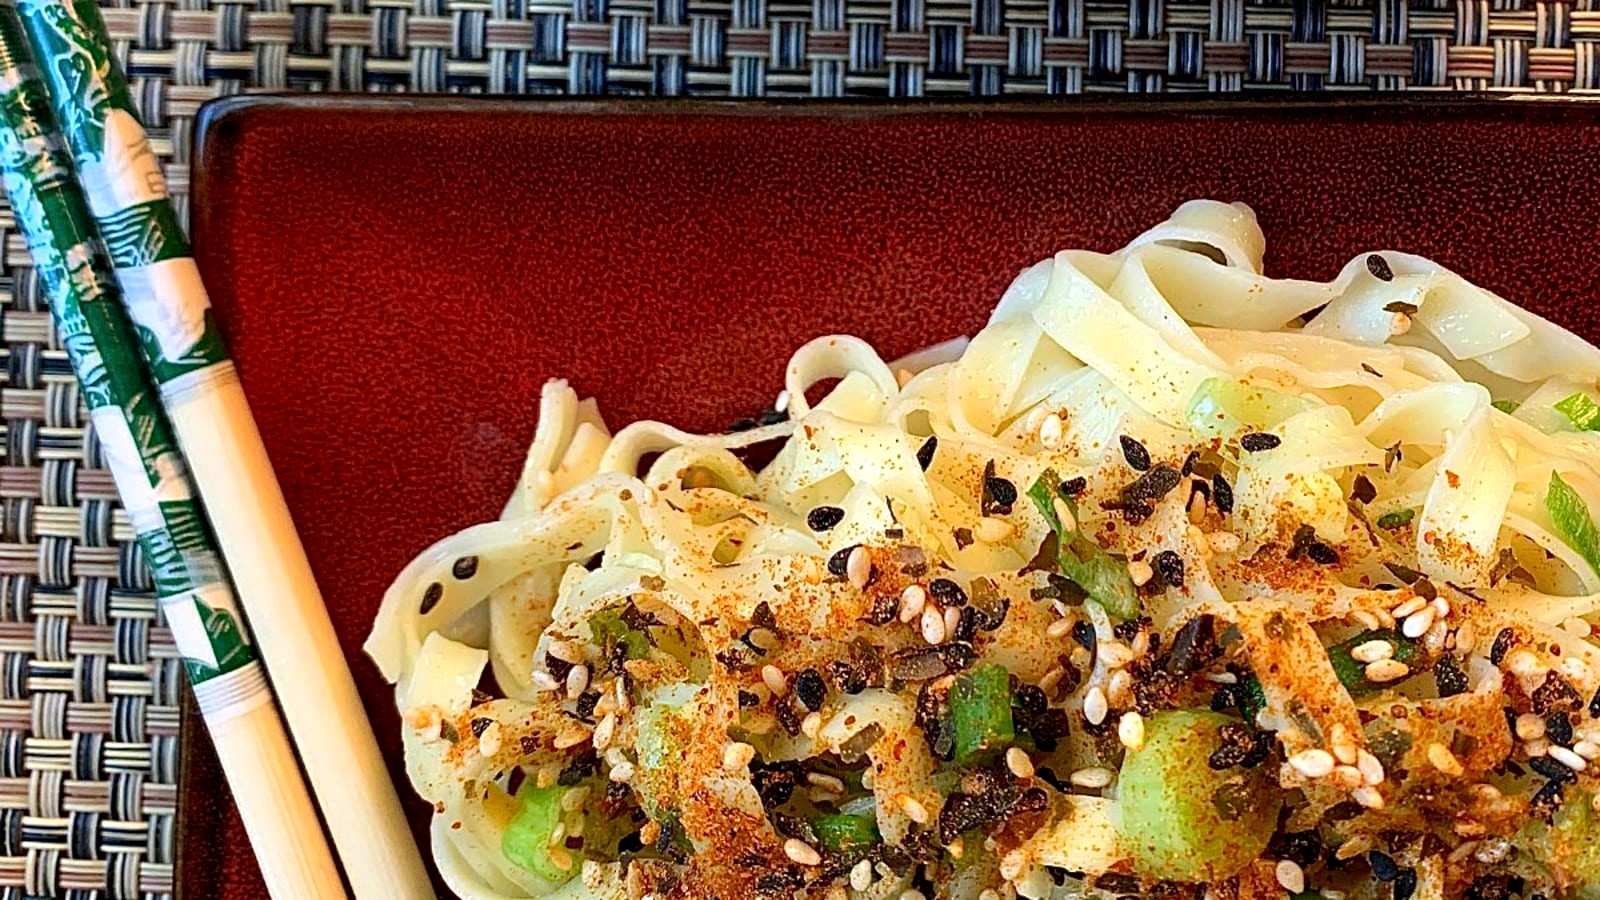 Image of Ginger Scallion Noodles with Spicy Seaweed Sprinkles